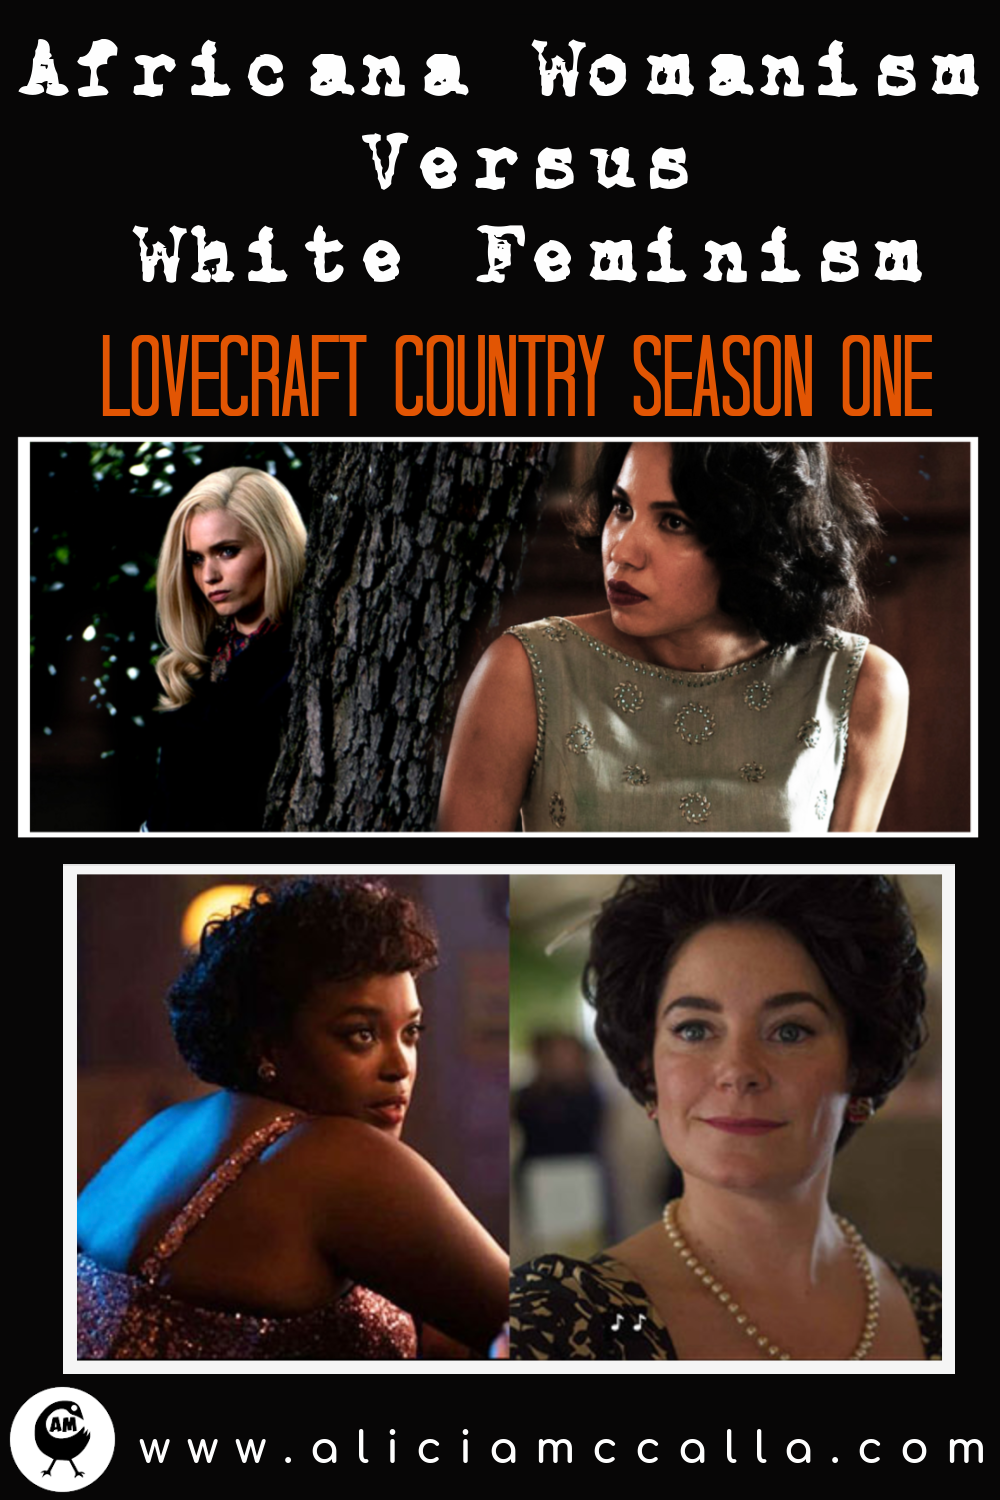 The Symbolic Battle Between Africana Womanism and White Feminism in HBO’s Lovecraft Country Season One